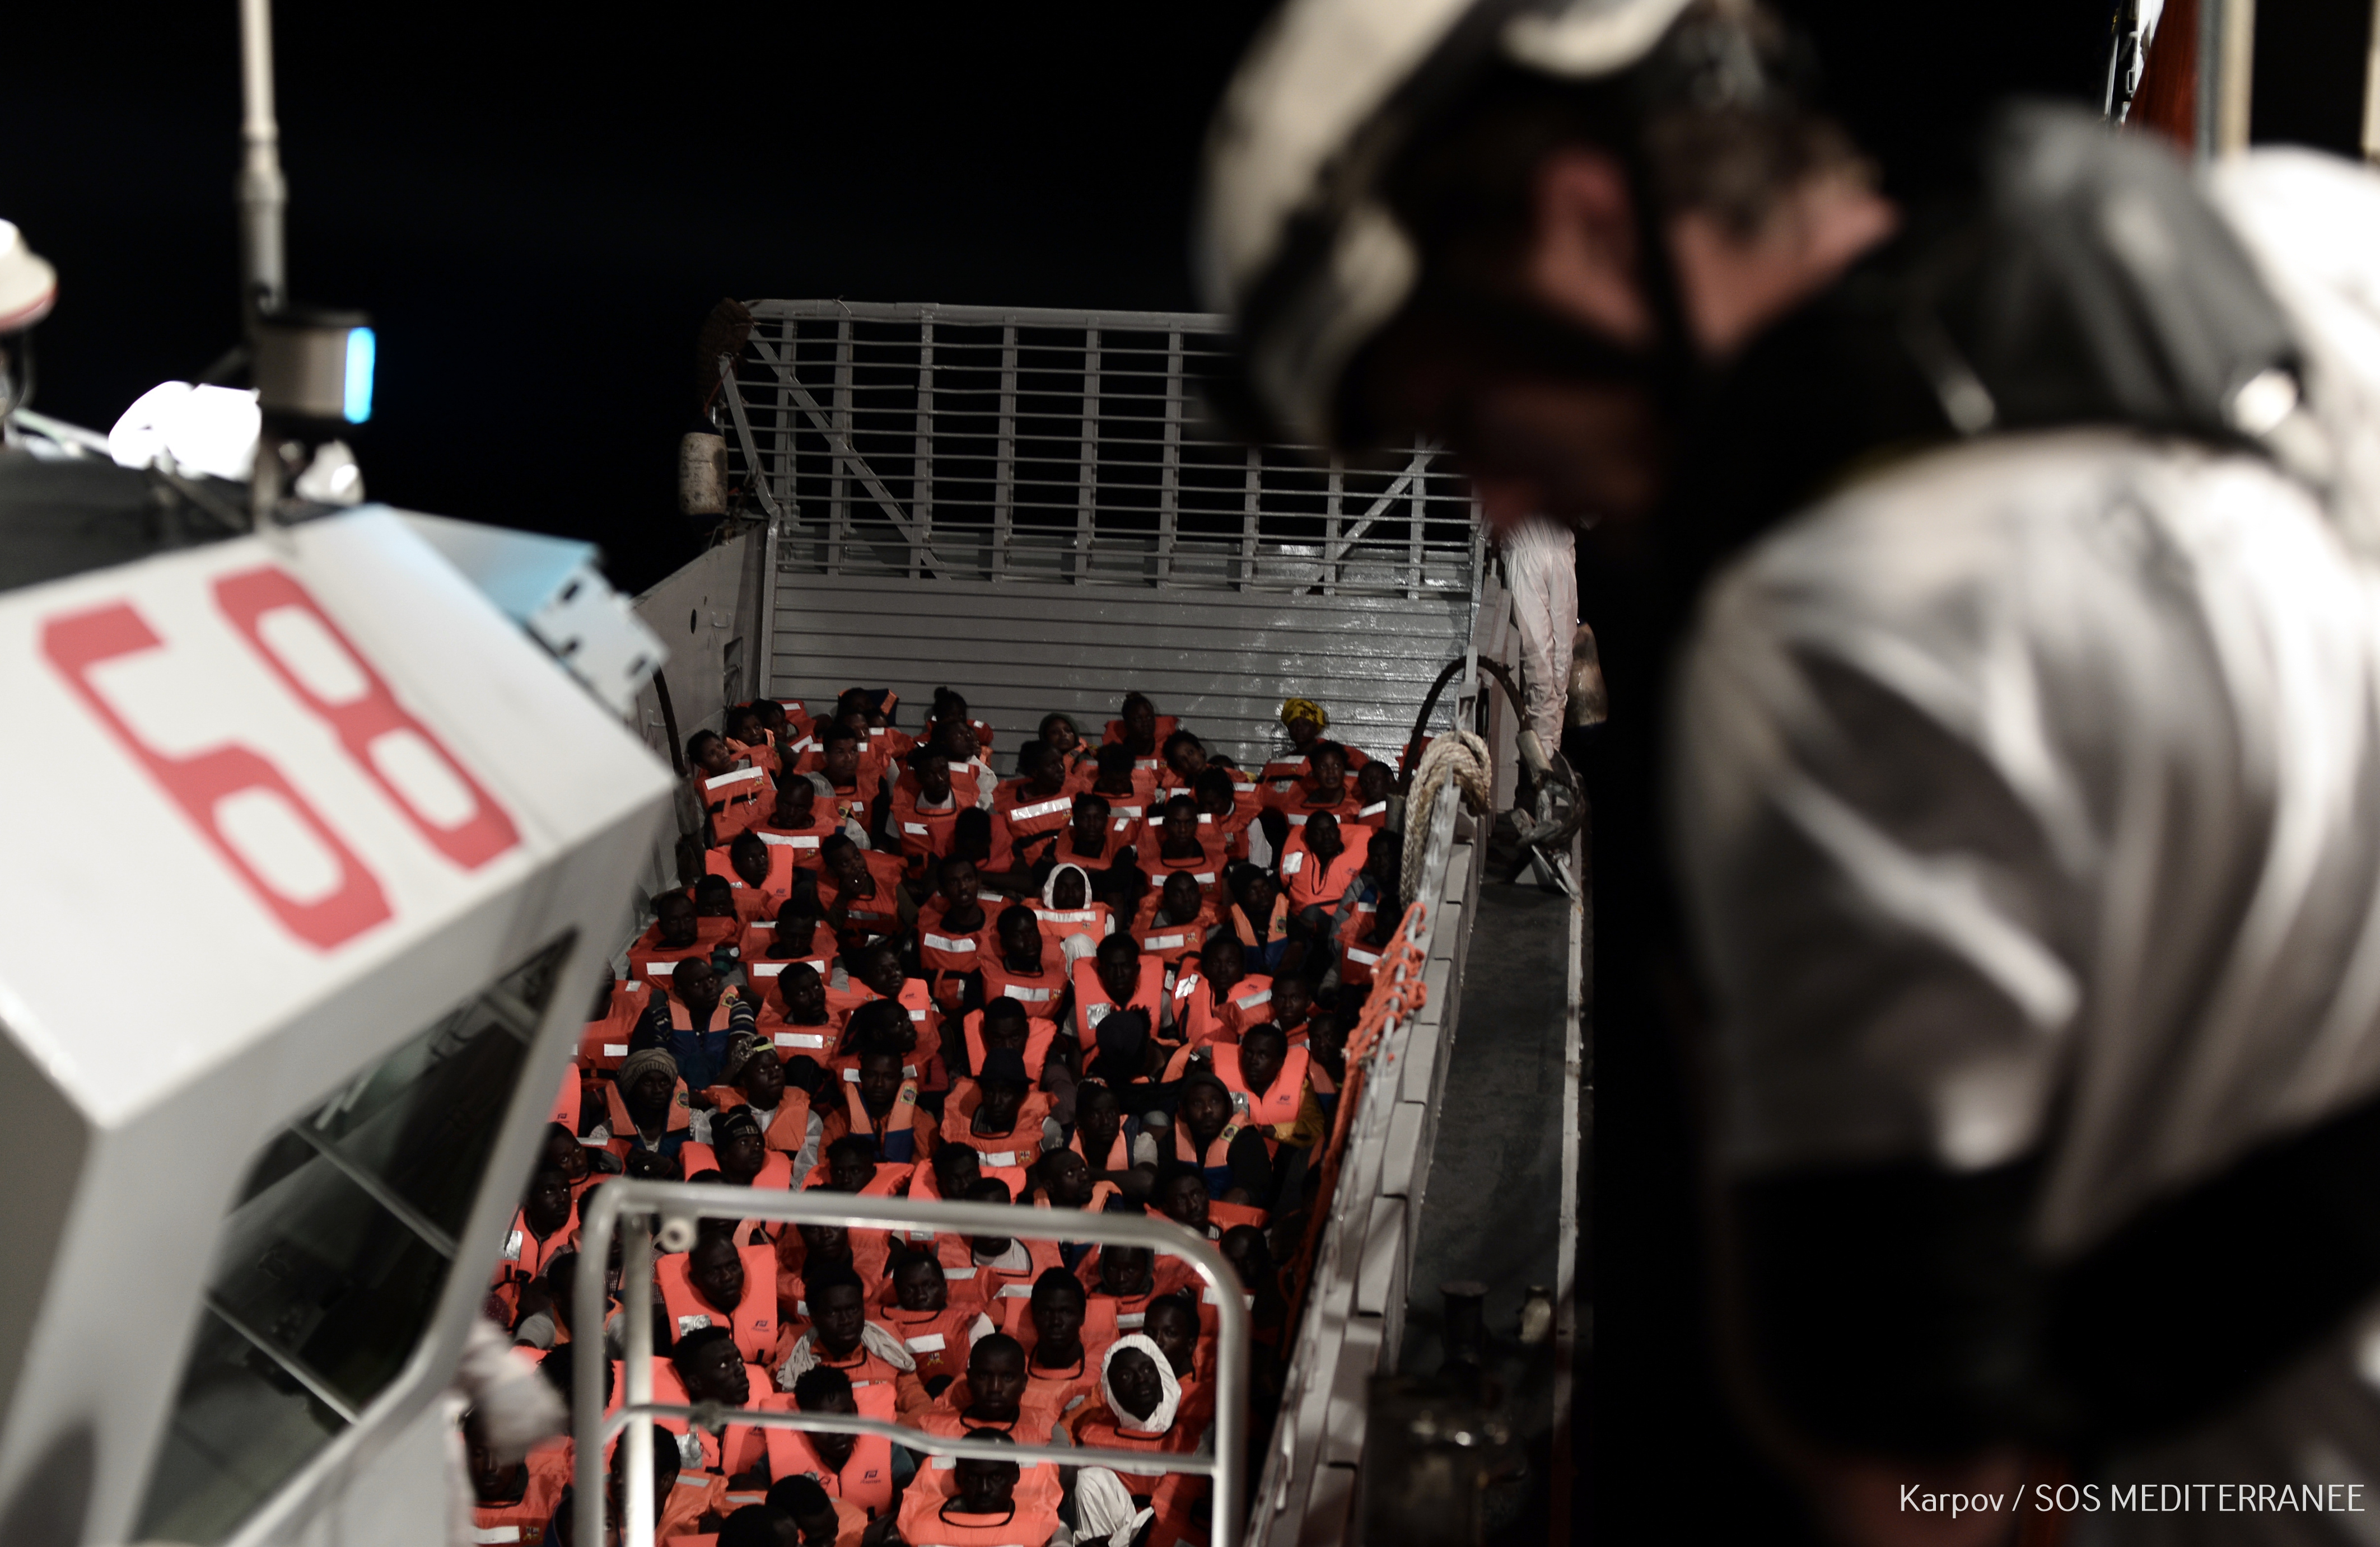 Many migrants rescued by the French boat Aquarius in 2018